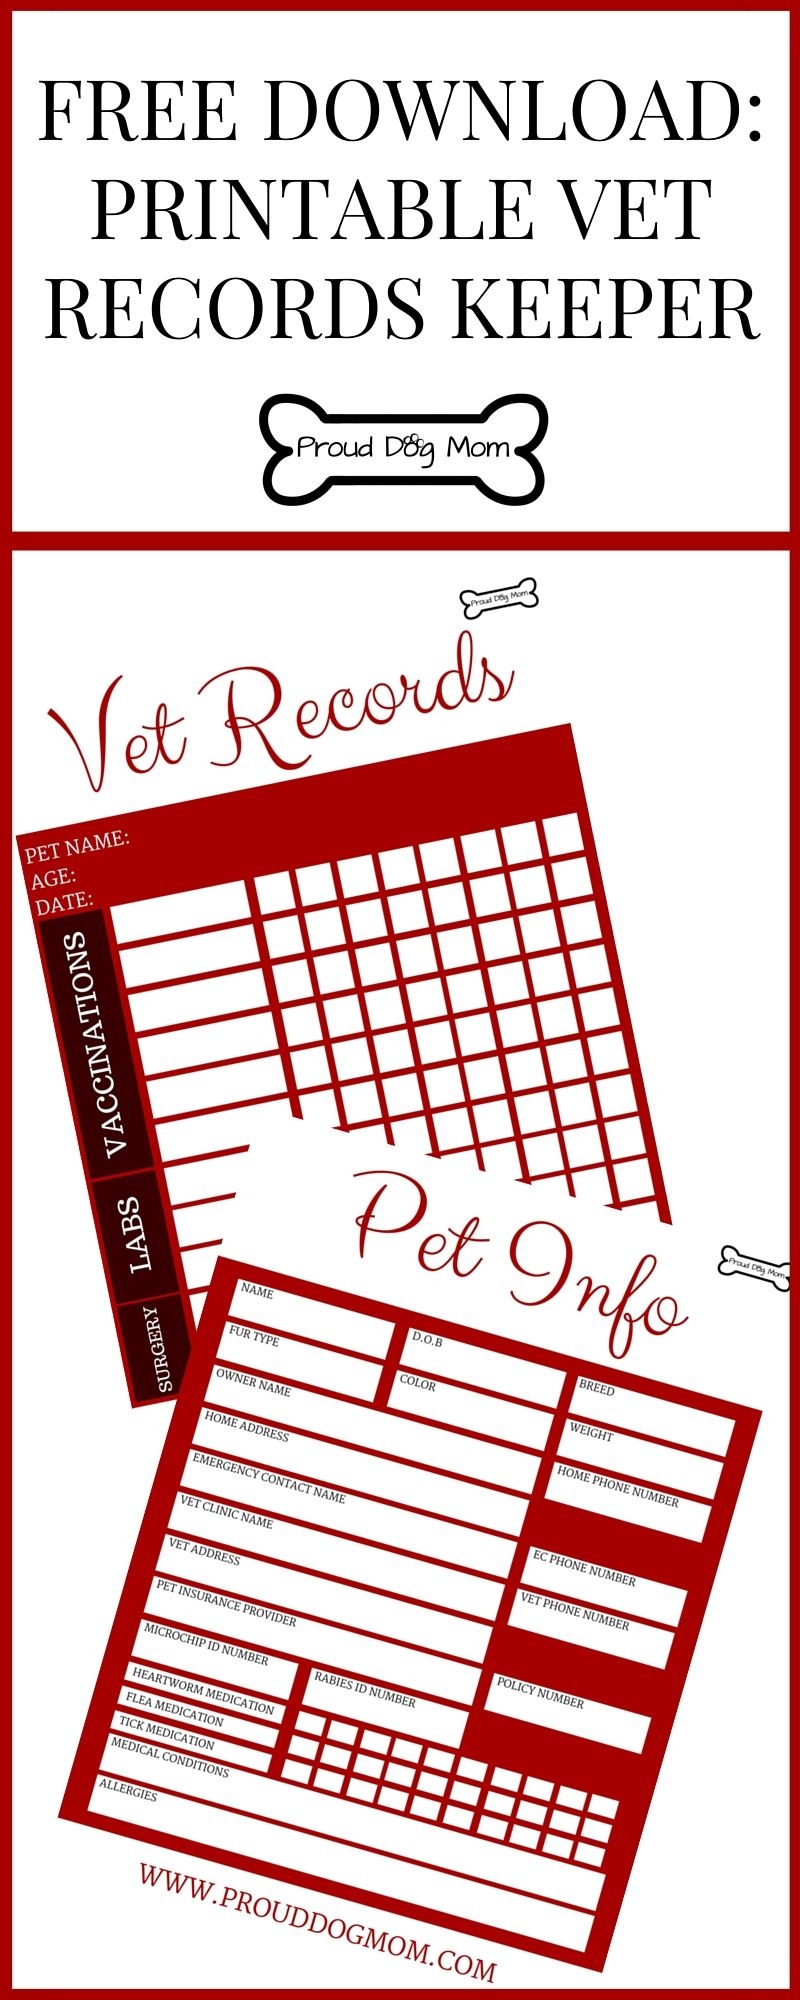 Free Download: Printable Vet Records Keeper | Pets | Puppies, Dog - Free Printable Pet Health Record